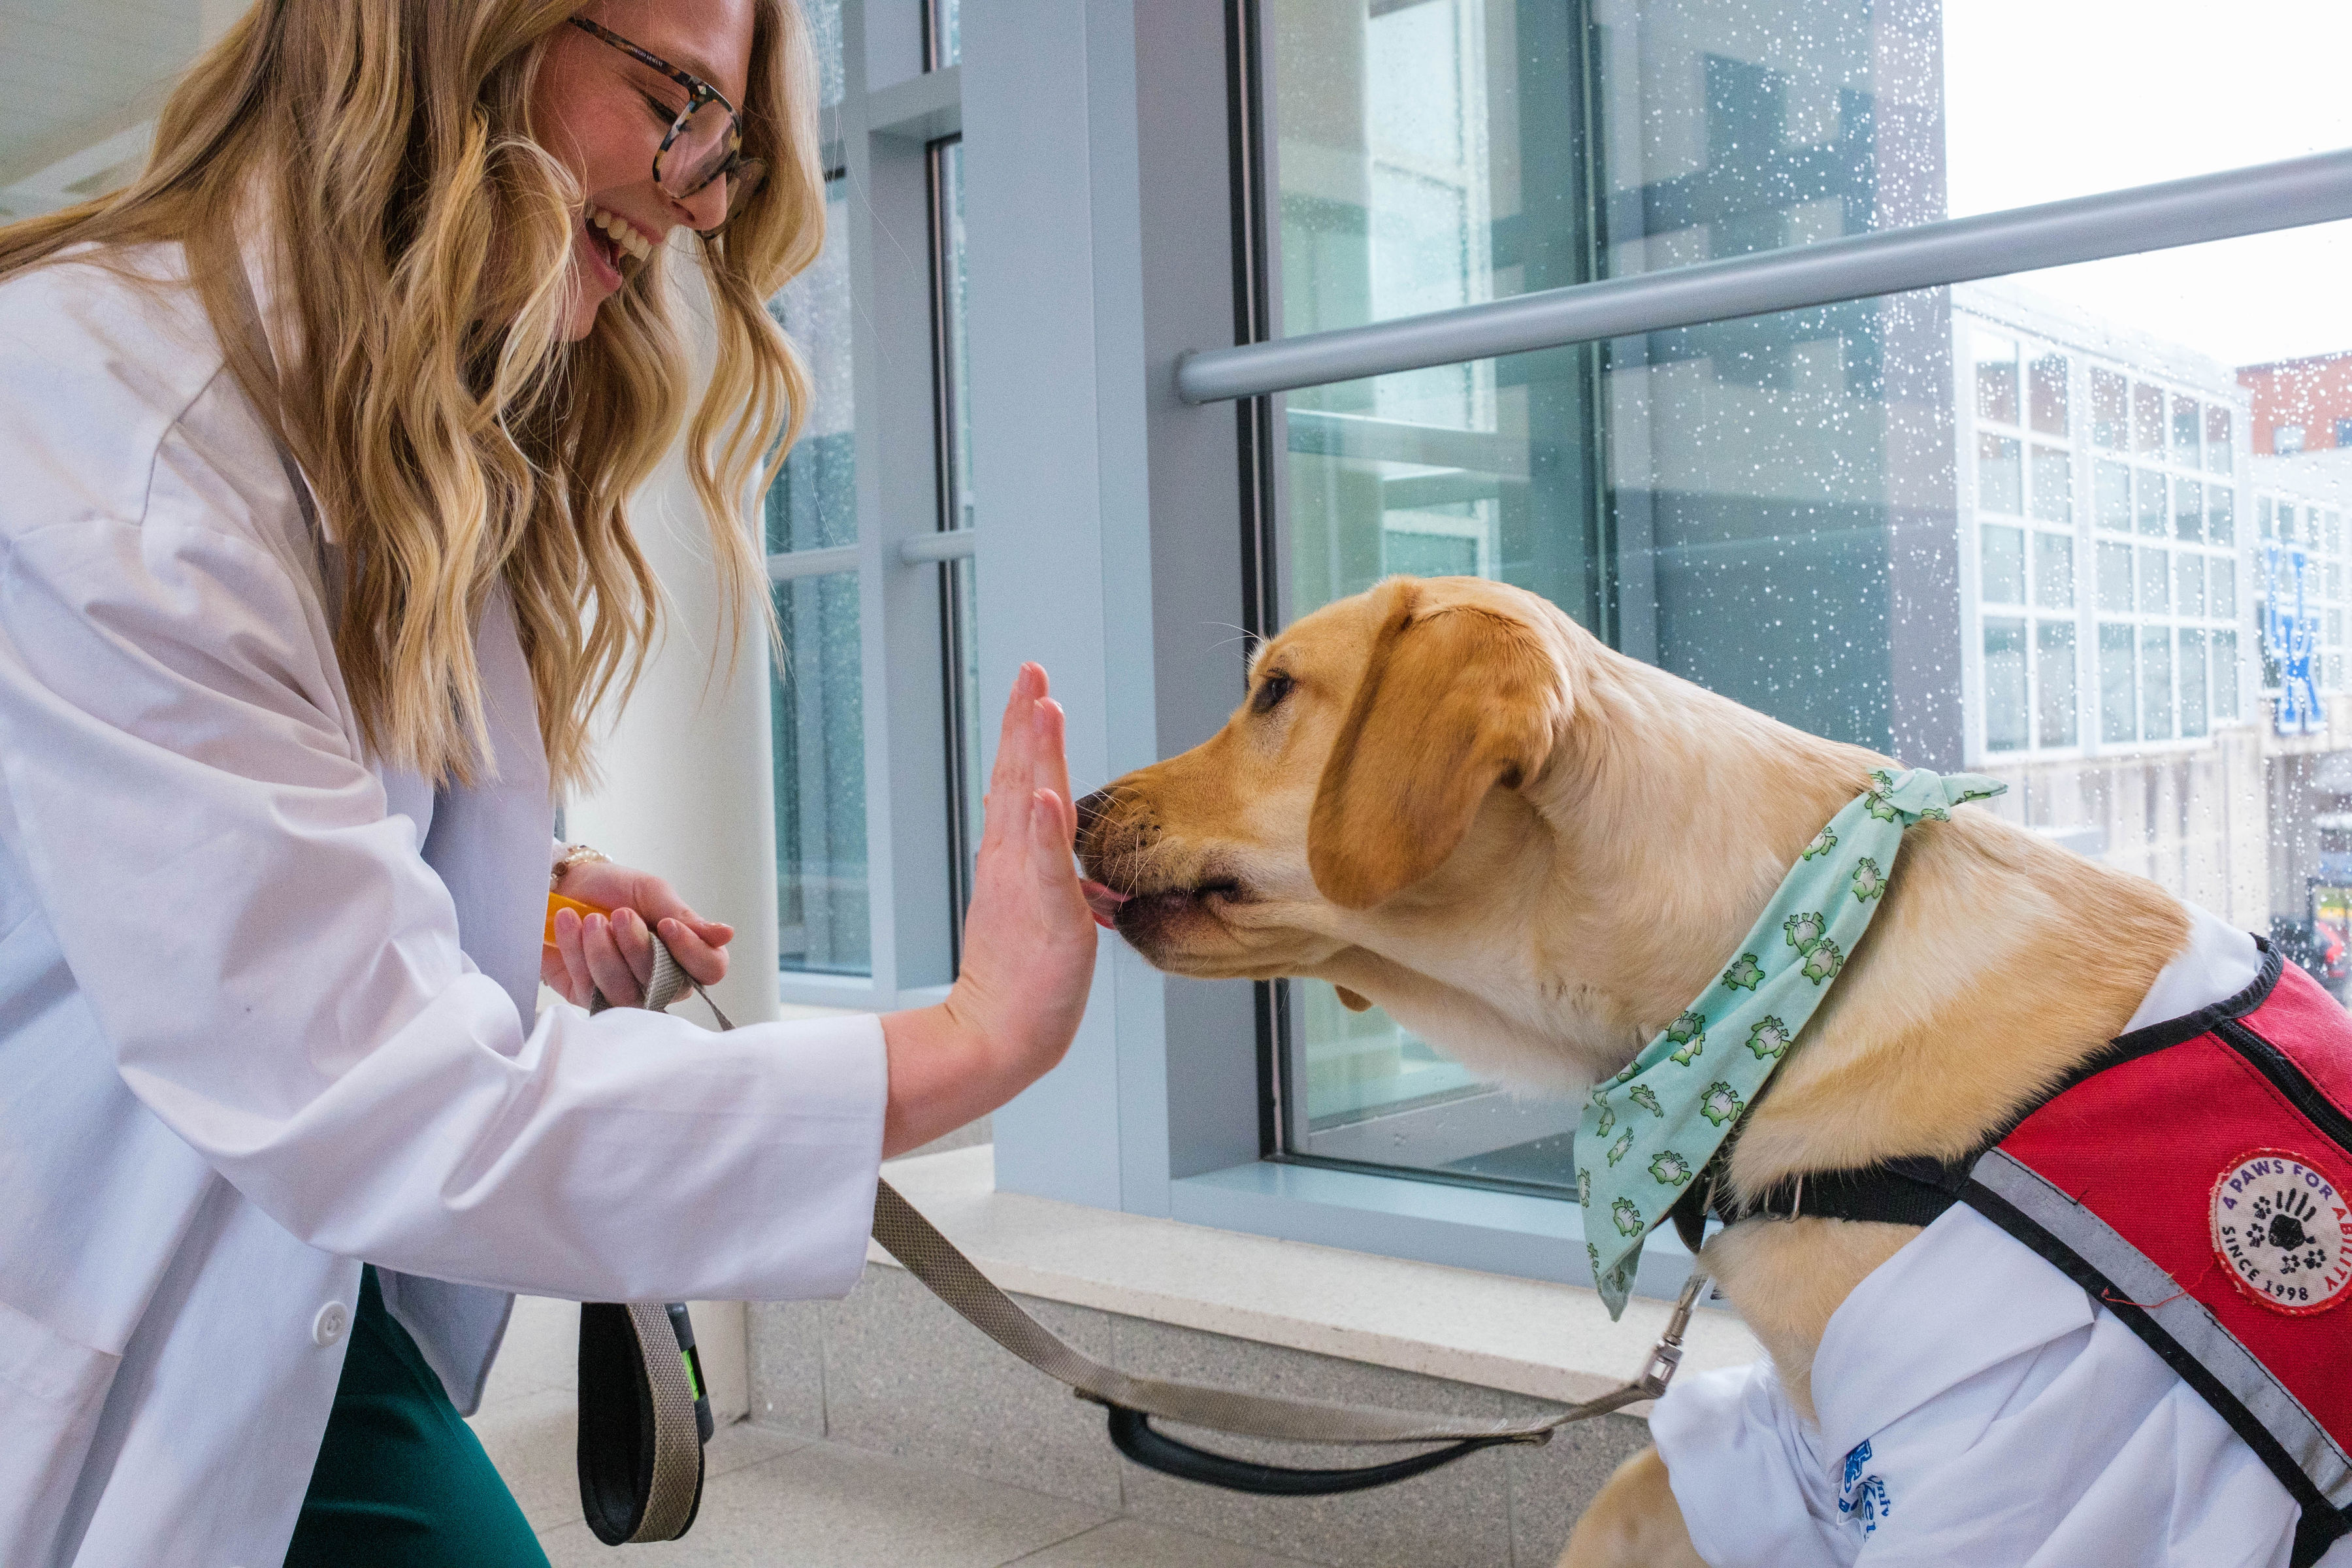 pharmacy student with palm up smiling, being licked by service dog